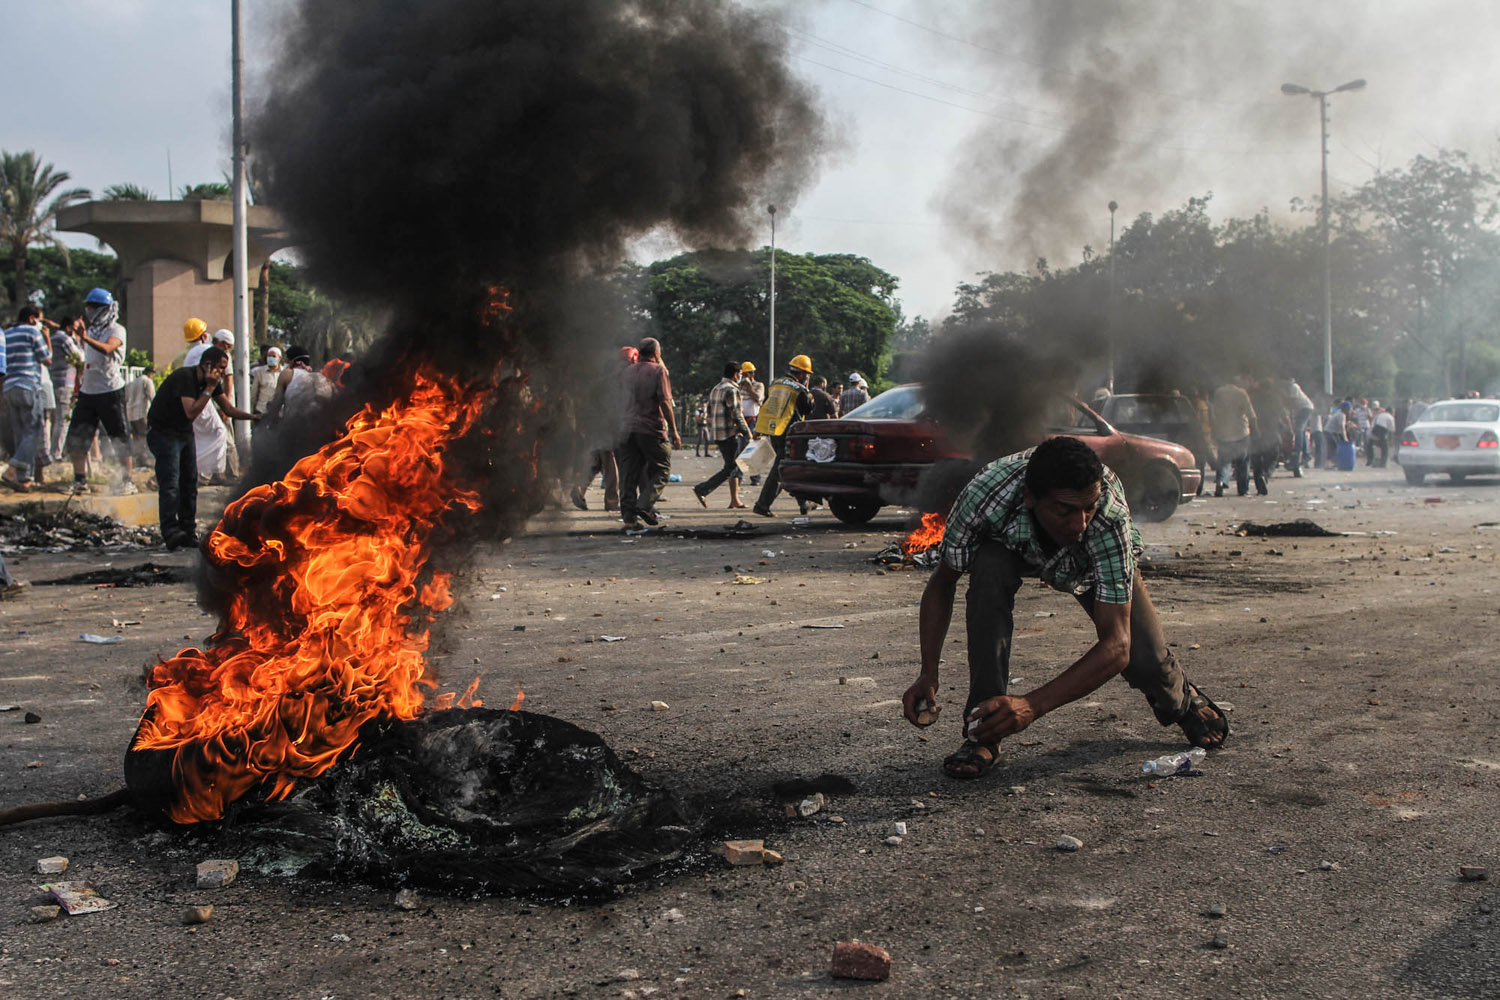 A Morsi supporter grabs rocks during clashes with police forces near the Rabaa sit-in.